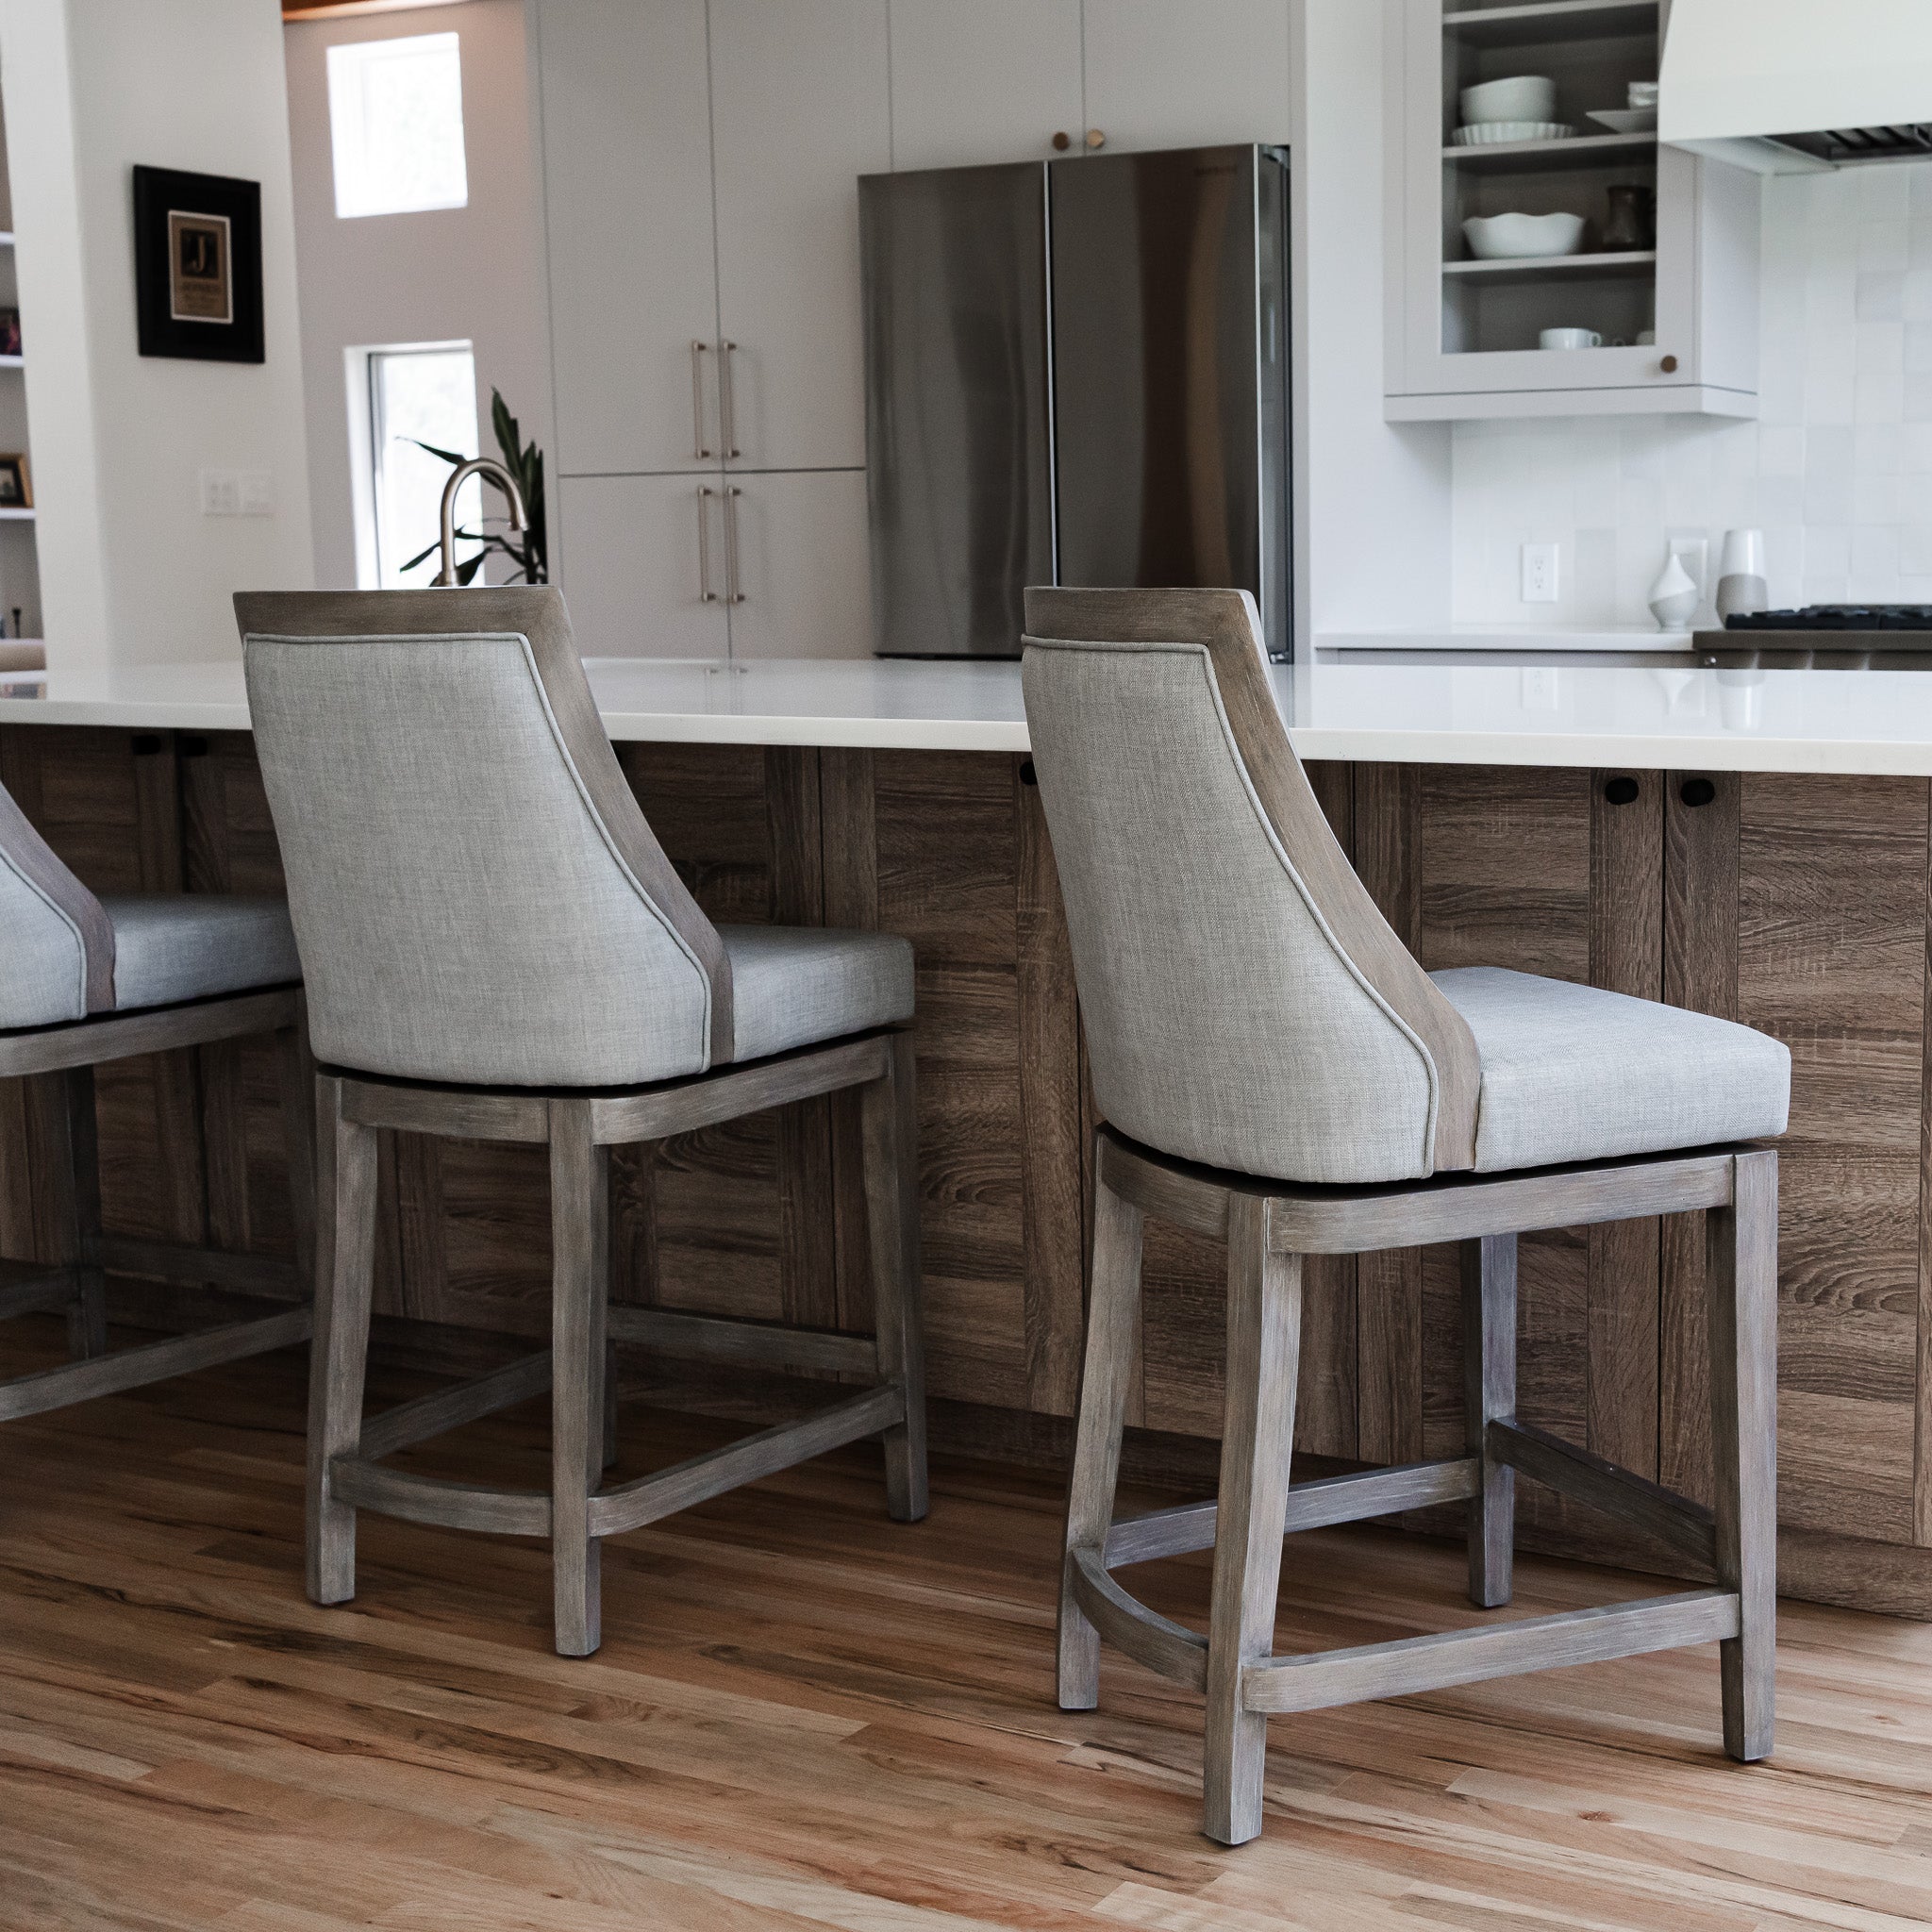 Vienna Bar Stool in Reclaimed Oak Finish with Ash Grey Fabric Upholstery in Stools by Maven Lane